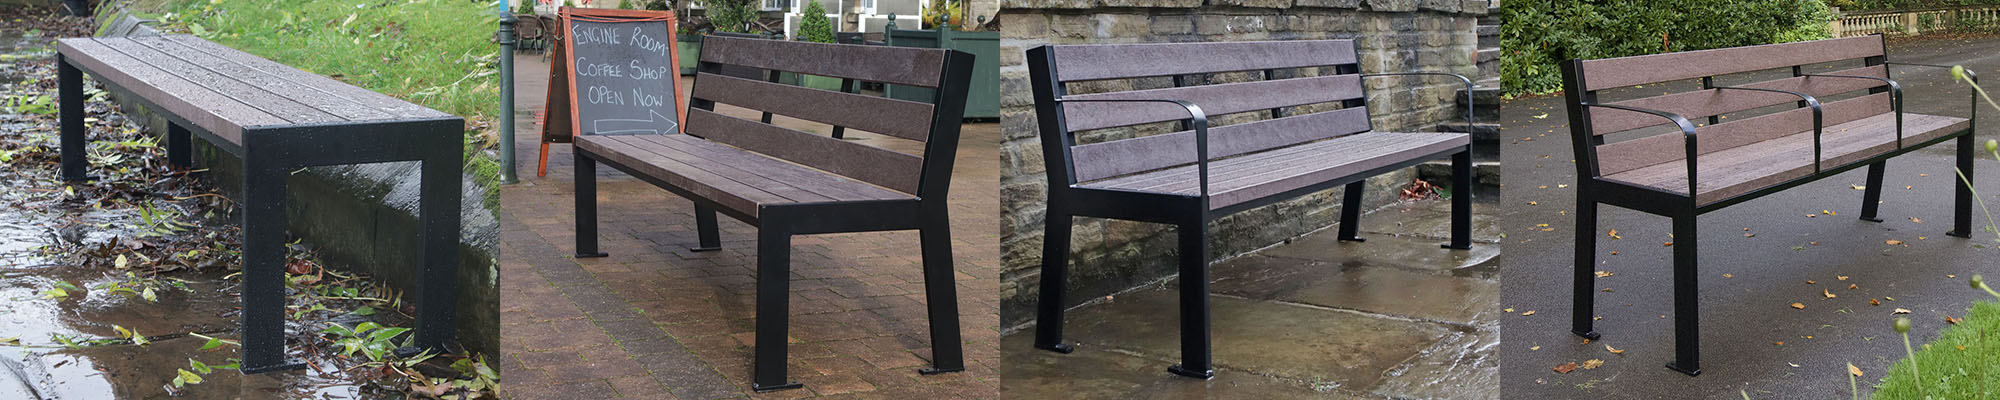 Our range of steel and recycled plastic benches combine elegance, practicality and sustainability with our 25 year guarantee